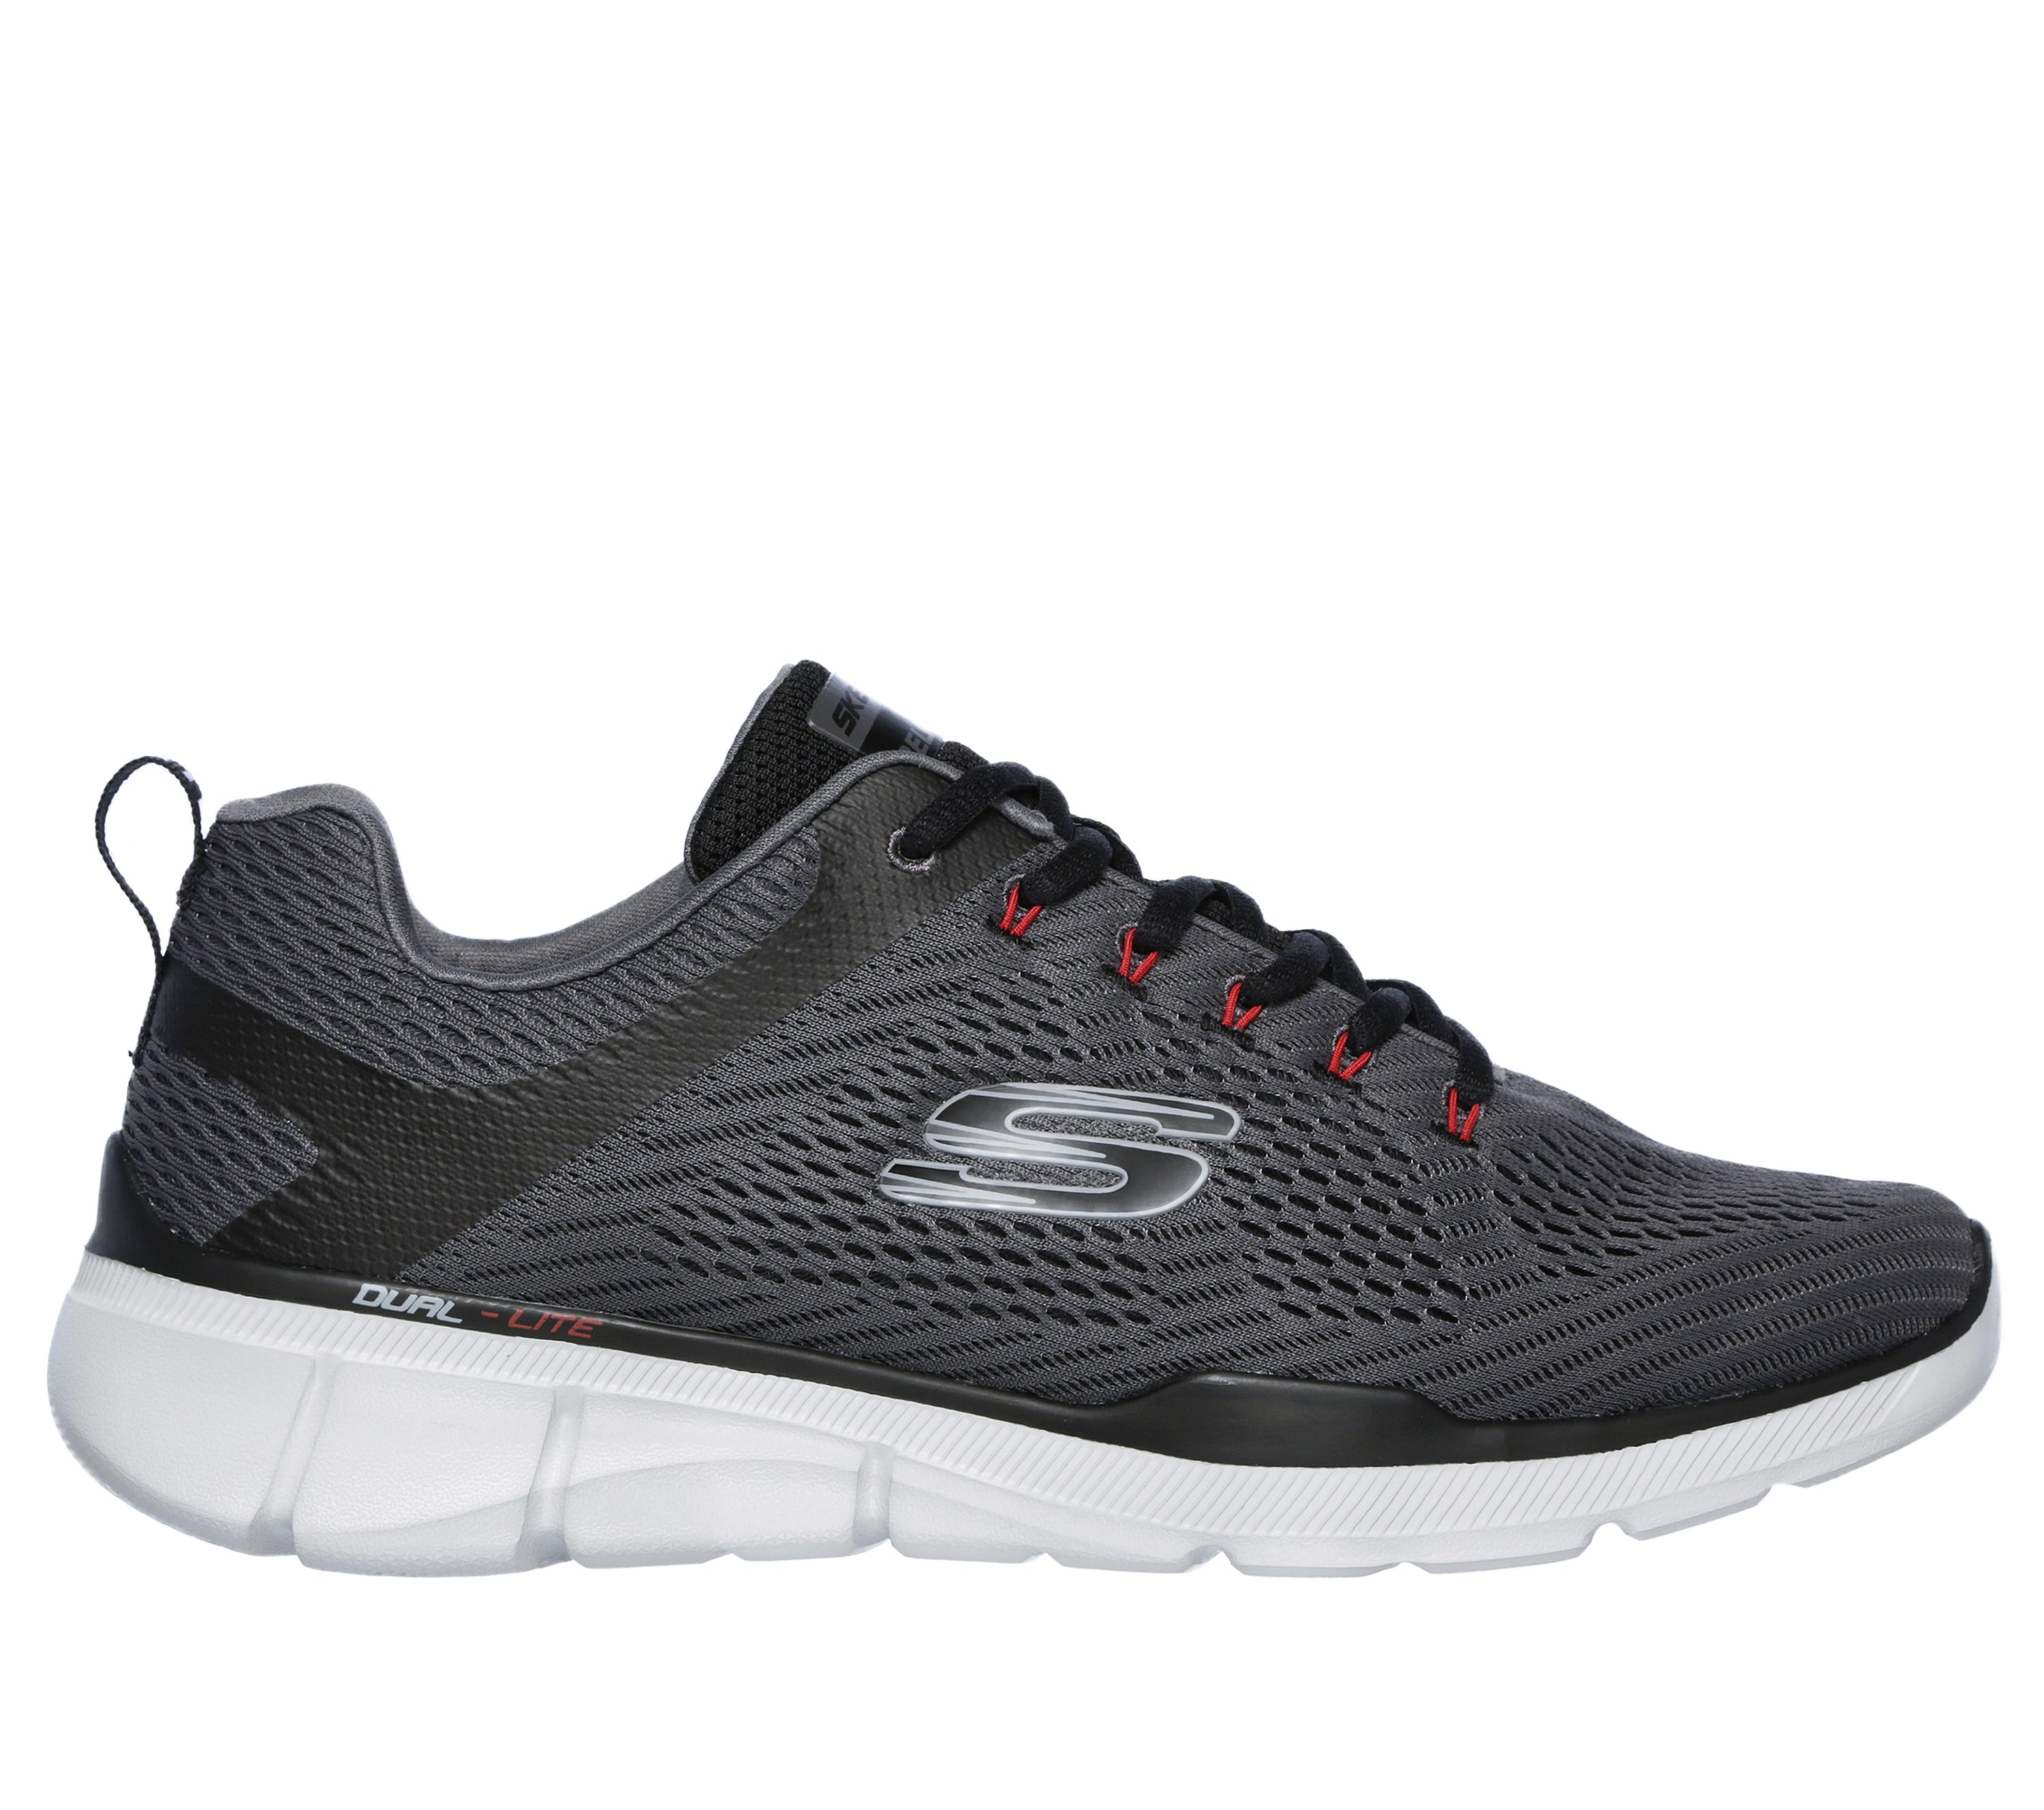 skechers men's equalizer 3.0 trainers